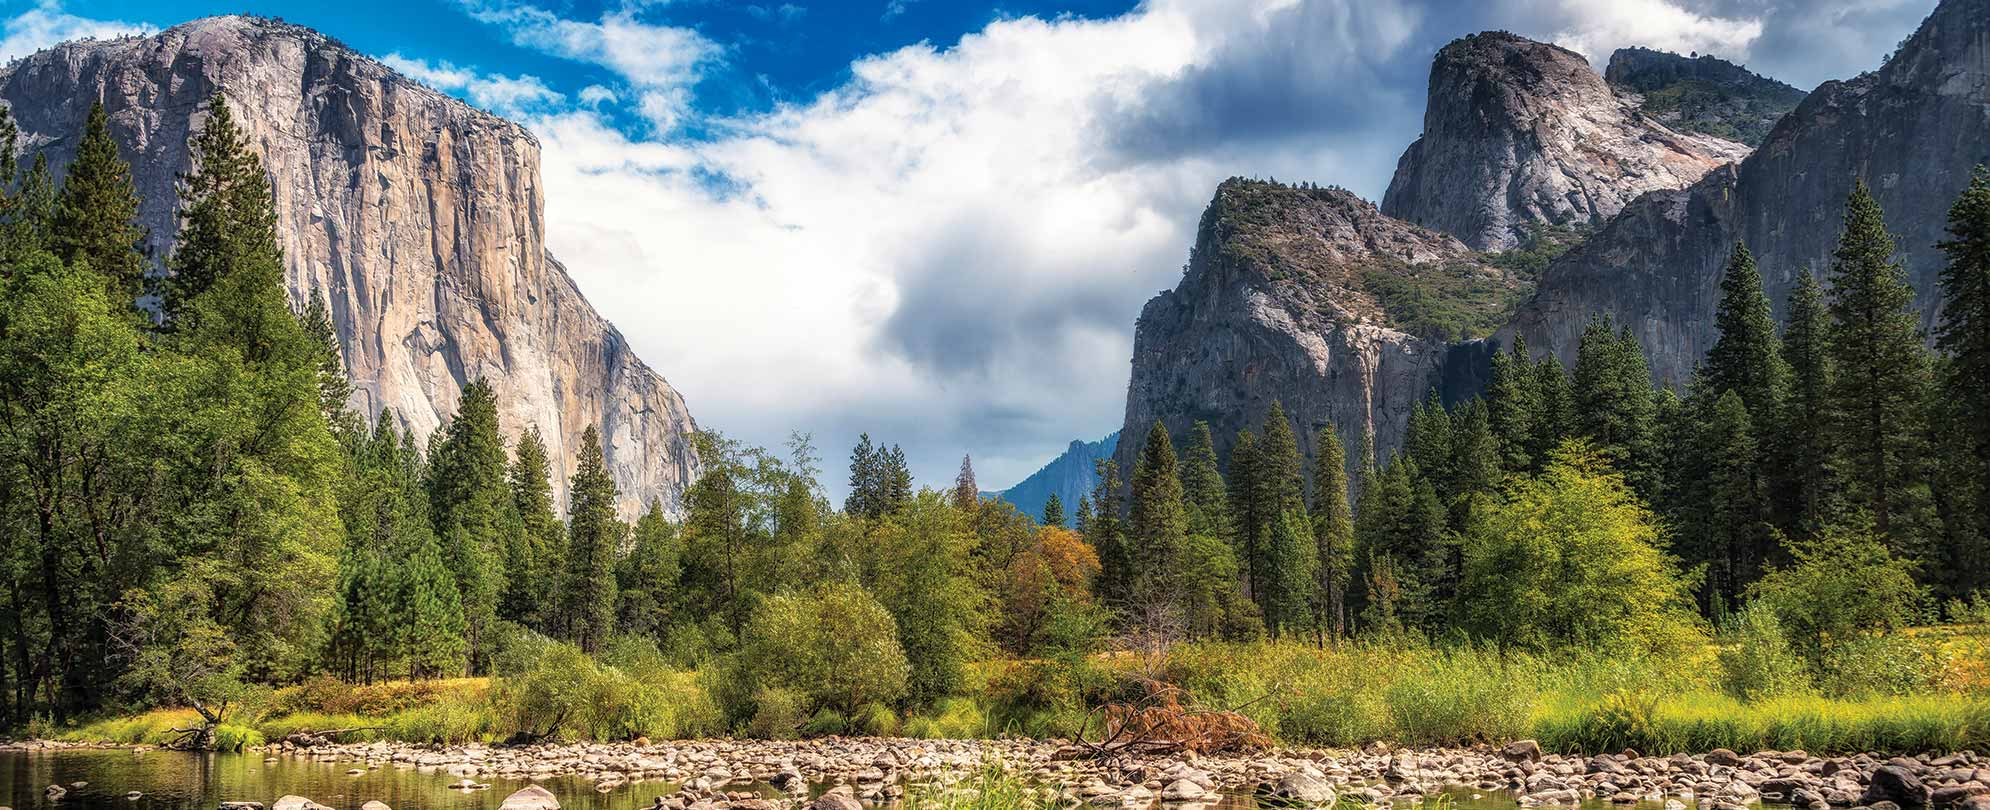 A view of the giant granite cliffs from the river valley below at Yosemite National Park in California